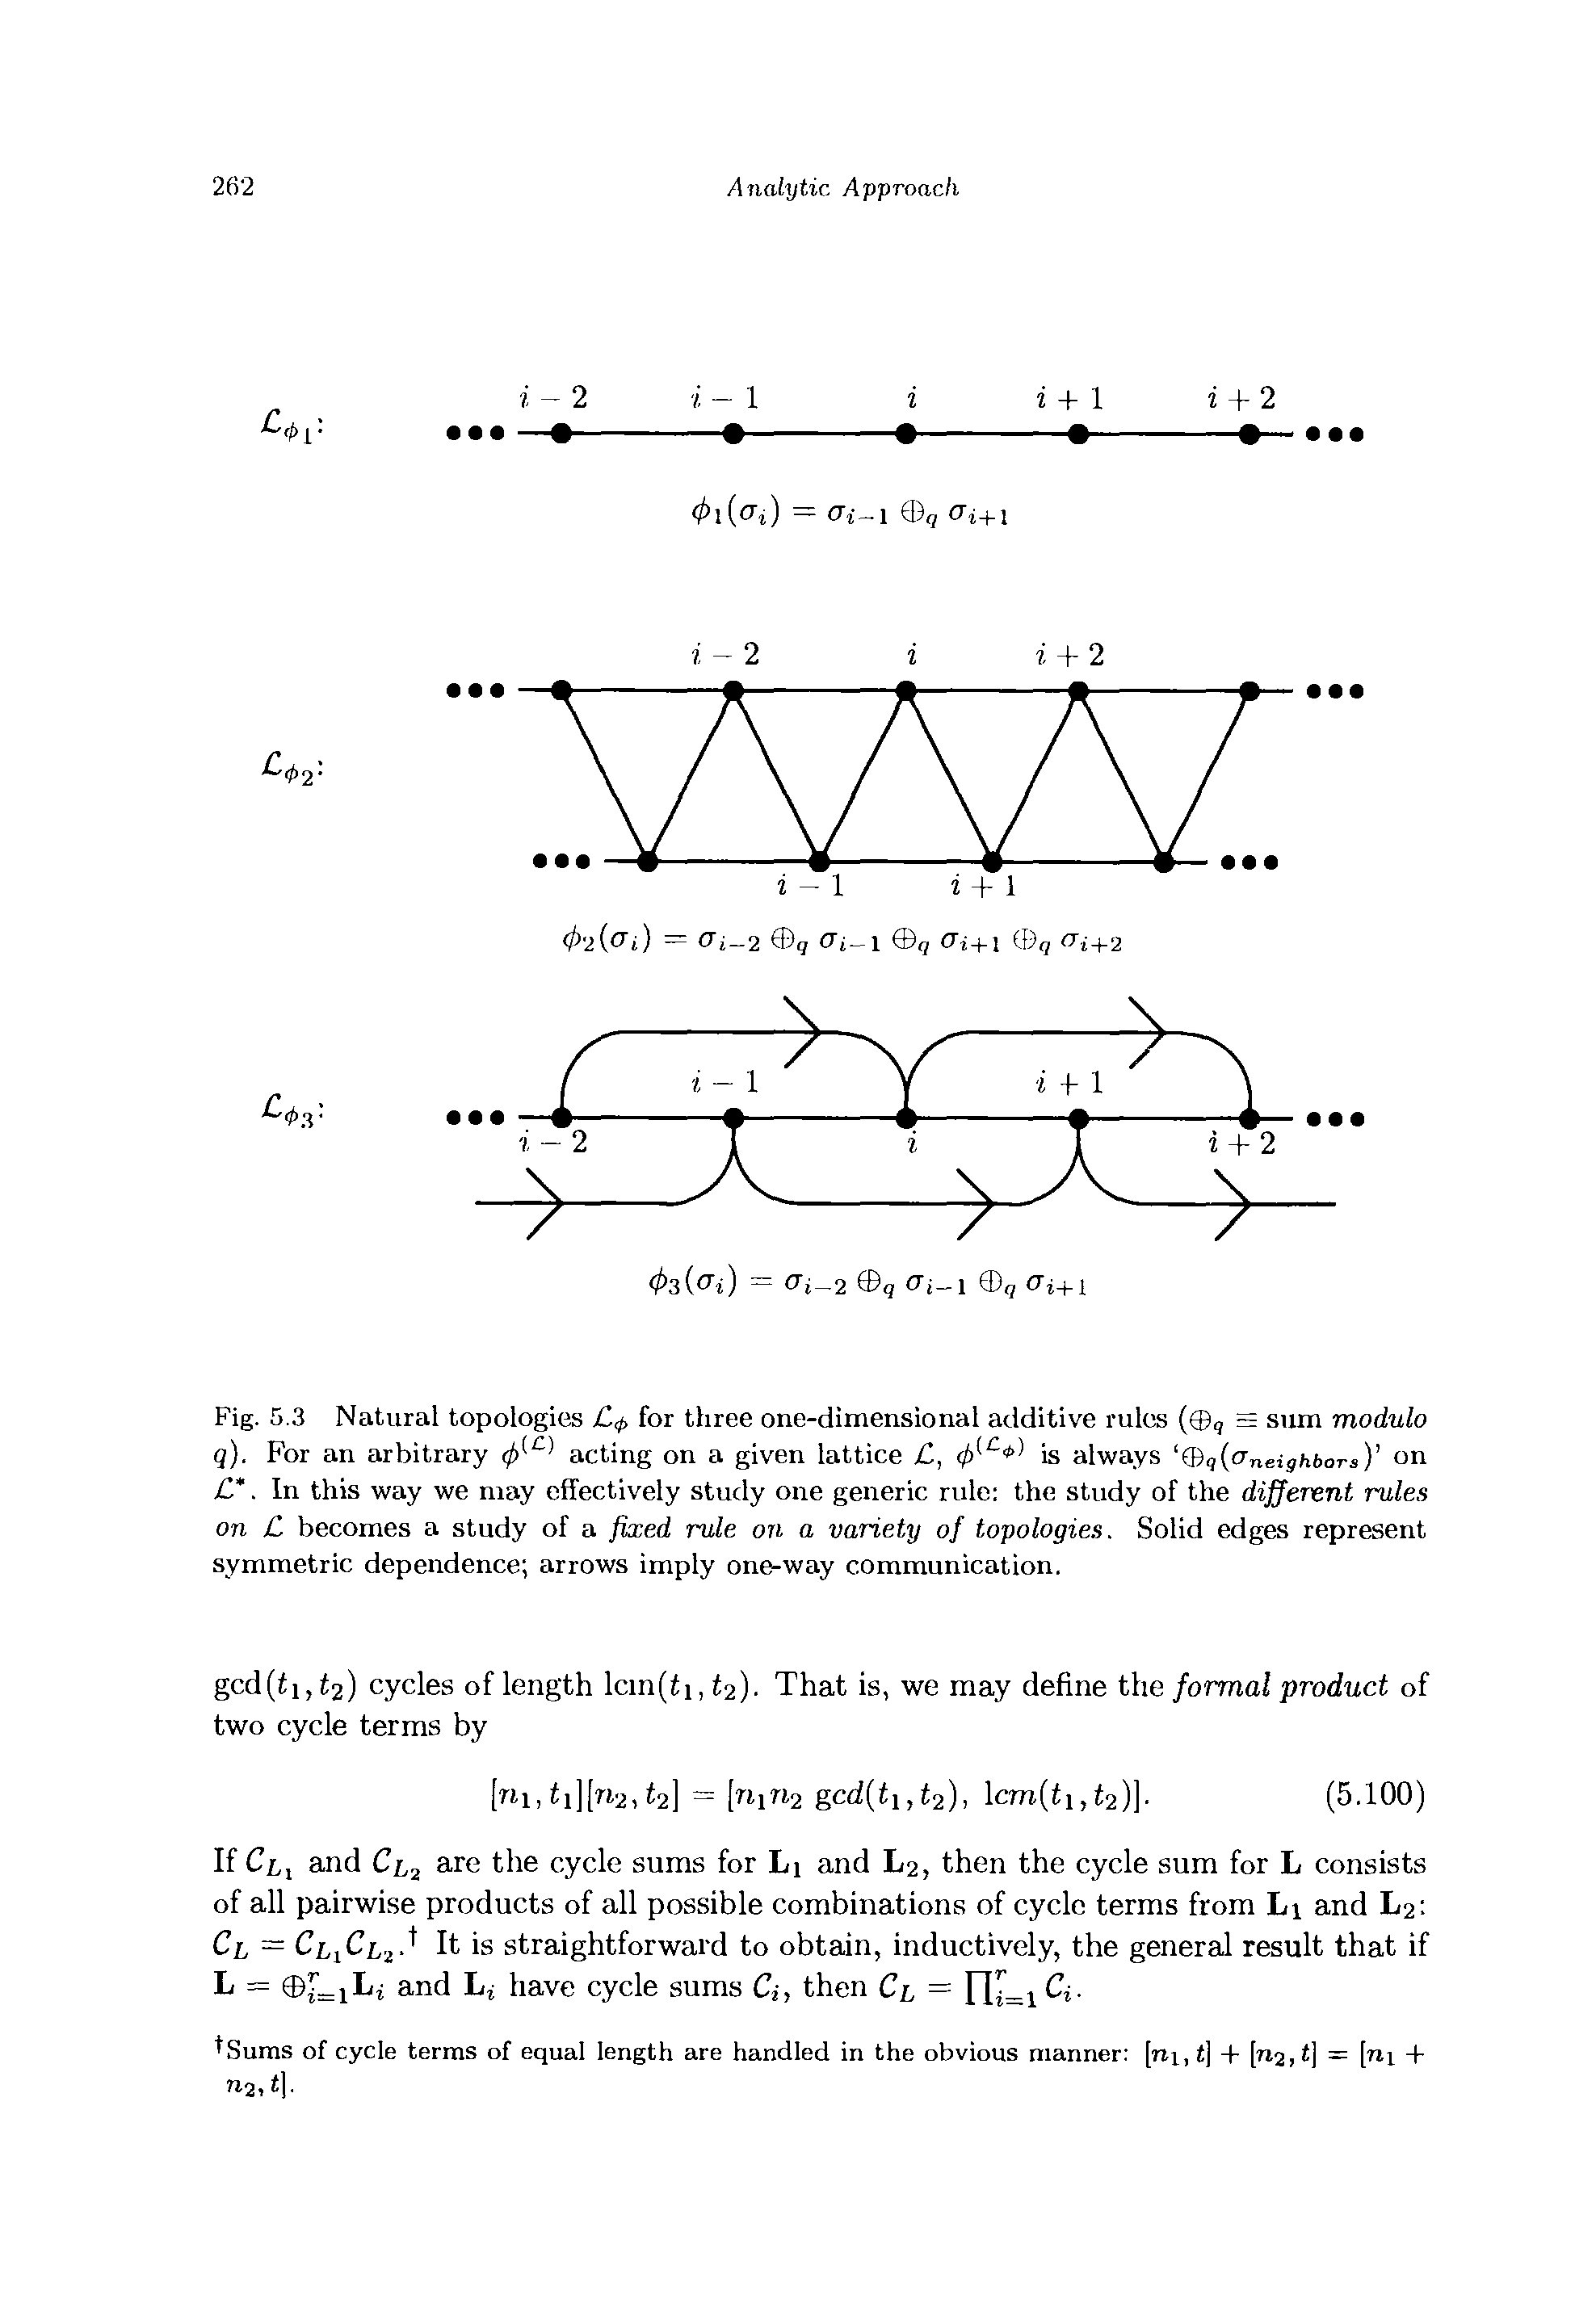 Fig. 5.3 Natural topologies C,p for three one-dimensional additive rules ( , s sum modulo q). For an arbitrary acting on a given lattice C, is always (Bq aneigMoTsY...